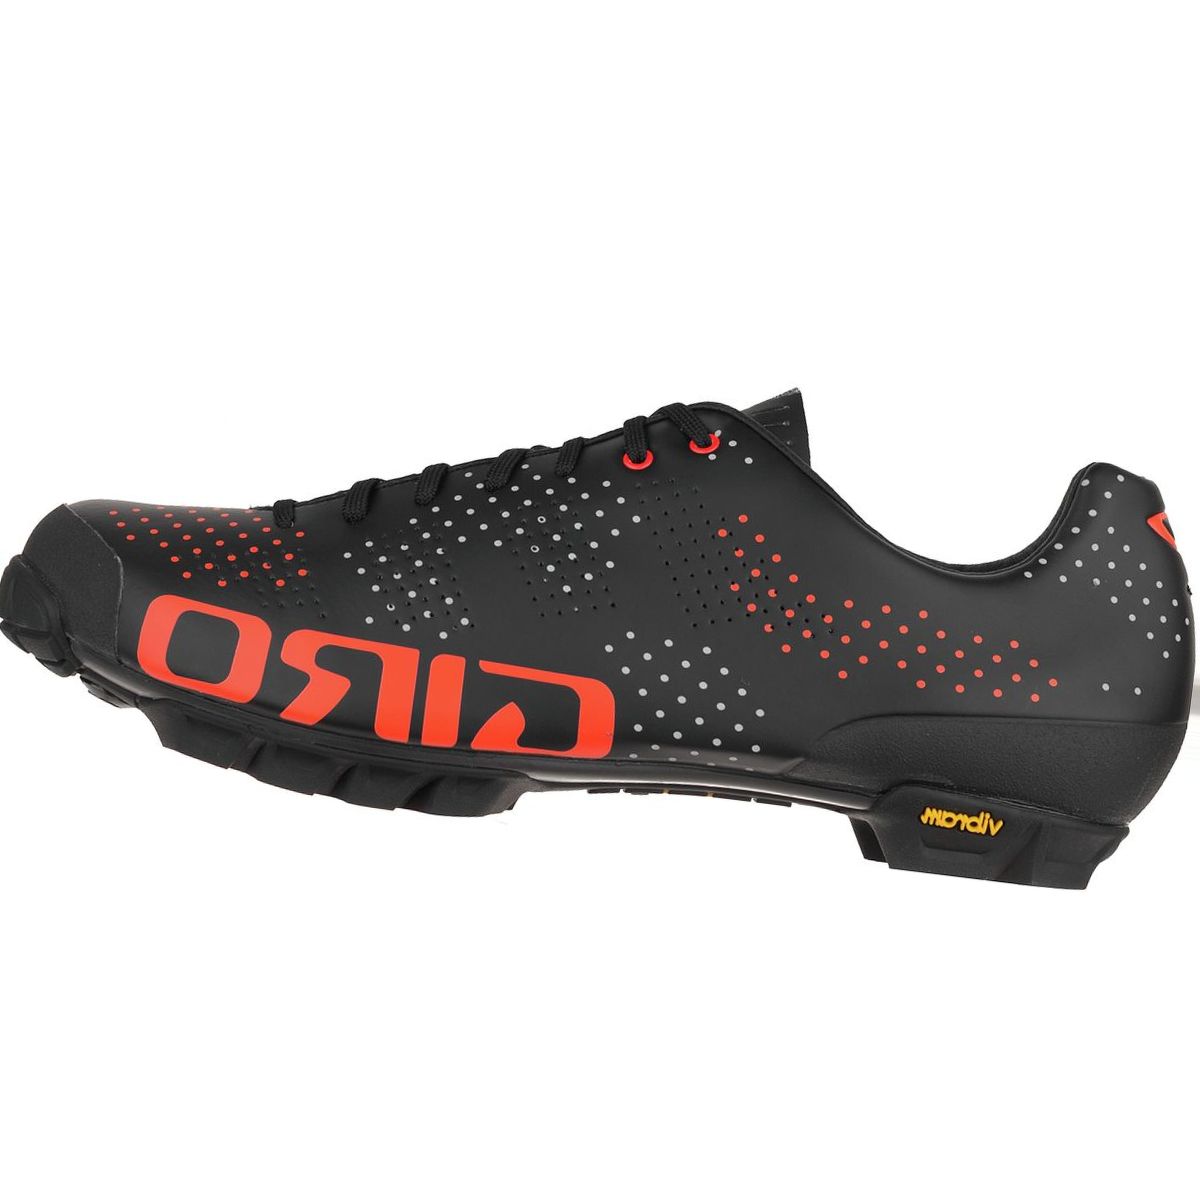 Giro Empire VR90 Limited Edition Cycling Shoe - Men's